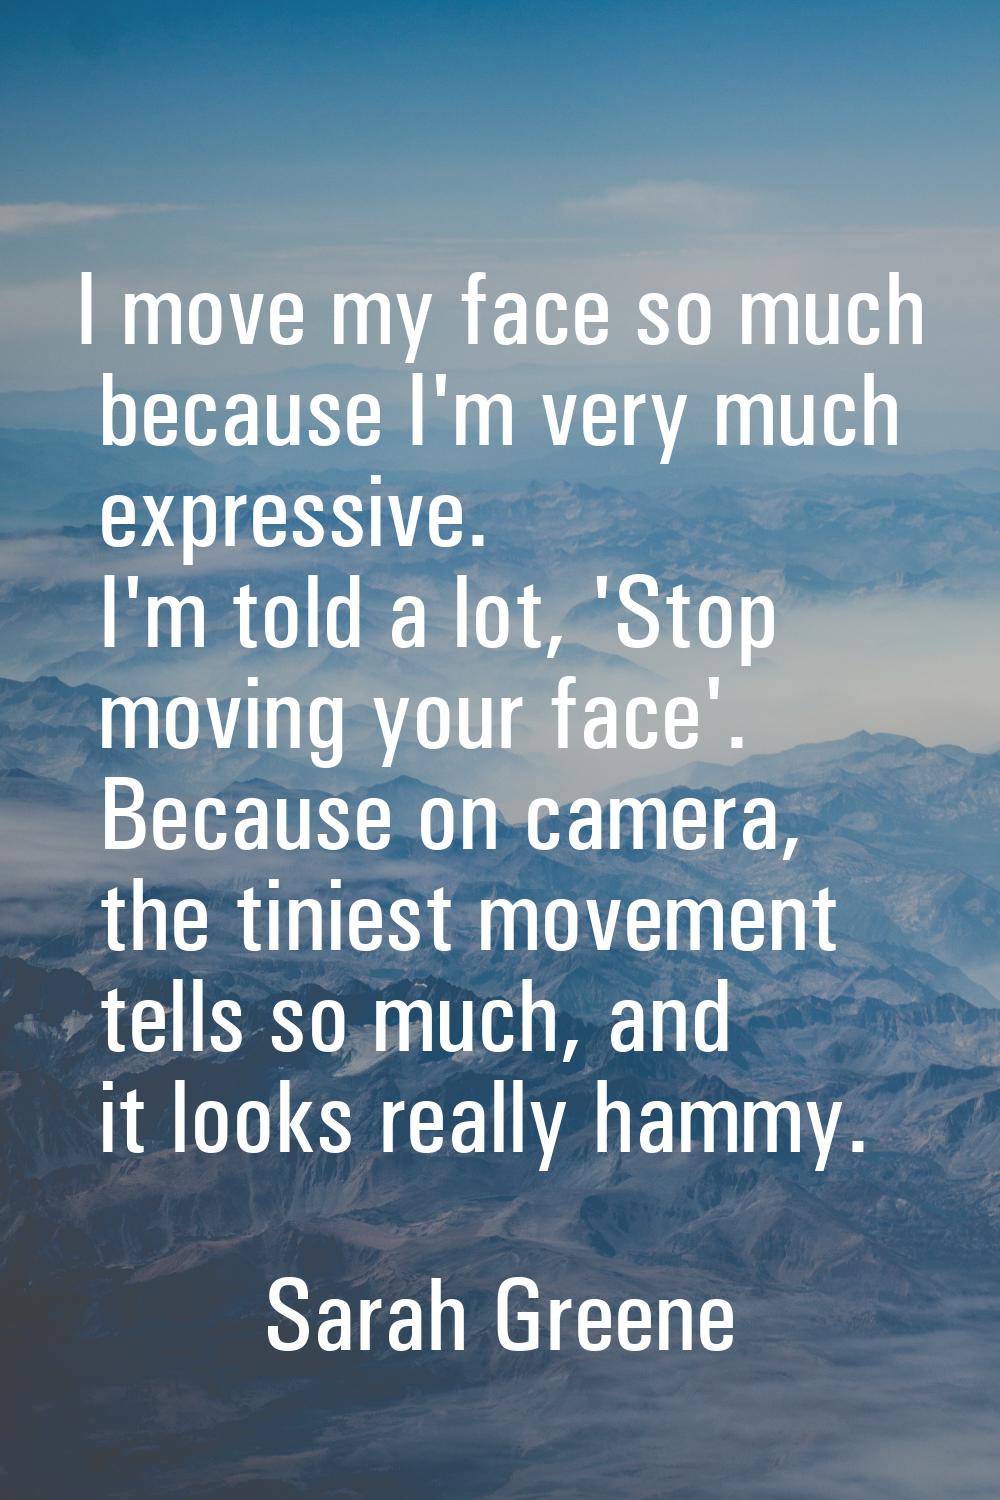 I move my face so much because I'm very much expressive. I'm told a lot, 'Stop moving your face'. B